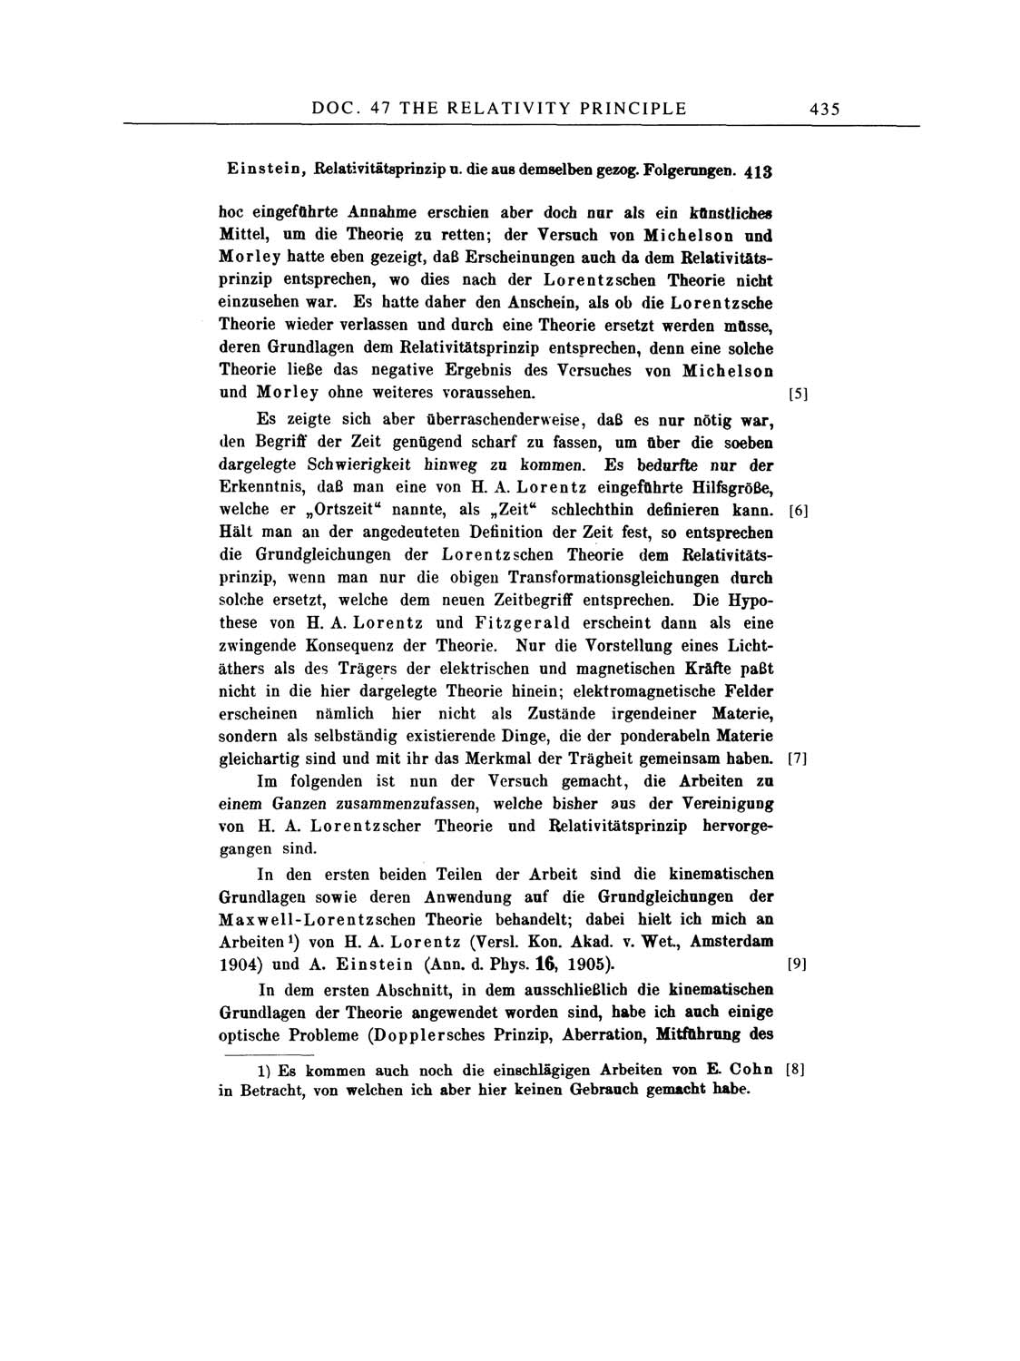 Volume 2: The Swiss Years: Writings, 1900-1909 page 435